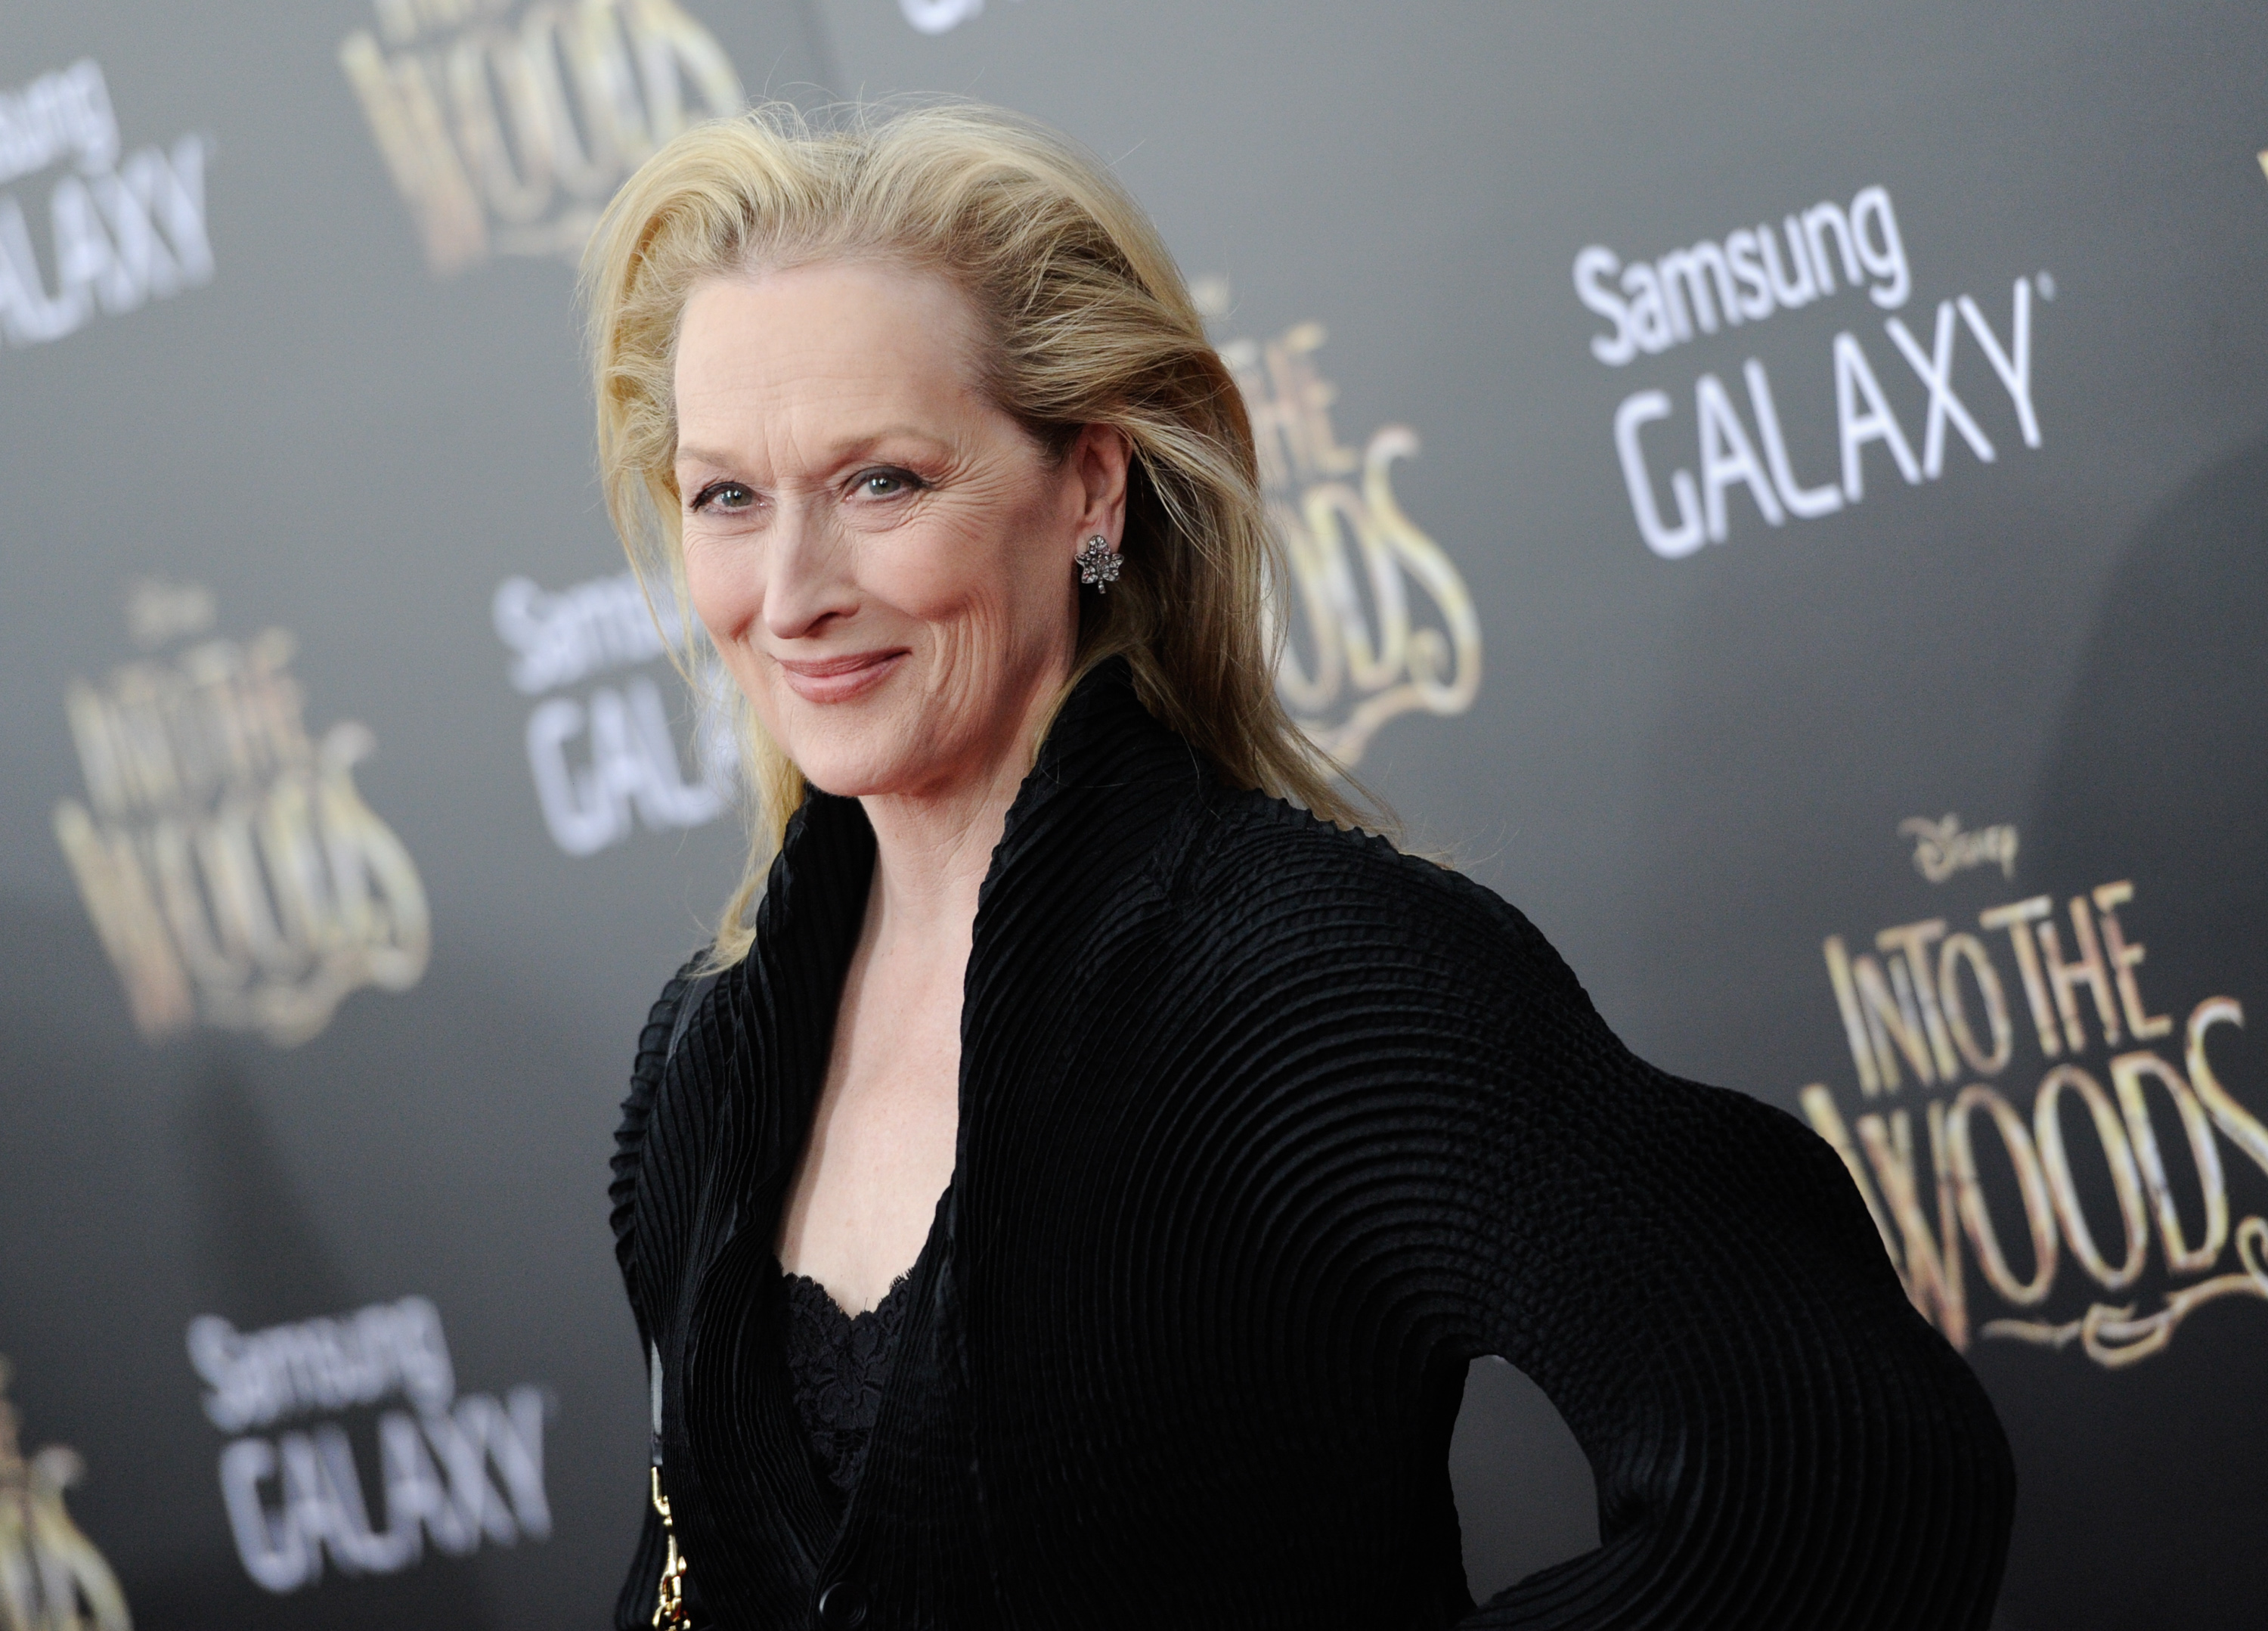 Meryl Streep attends the premiere of "Into The Woods" at the Ziegfeld Theatre on Dec. 8, 2014, in New York. (Evan Agostini—AP)